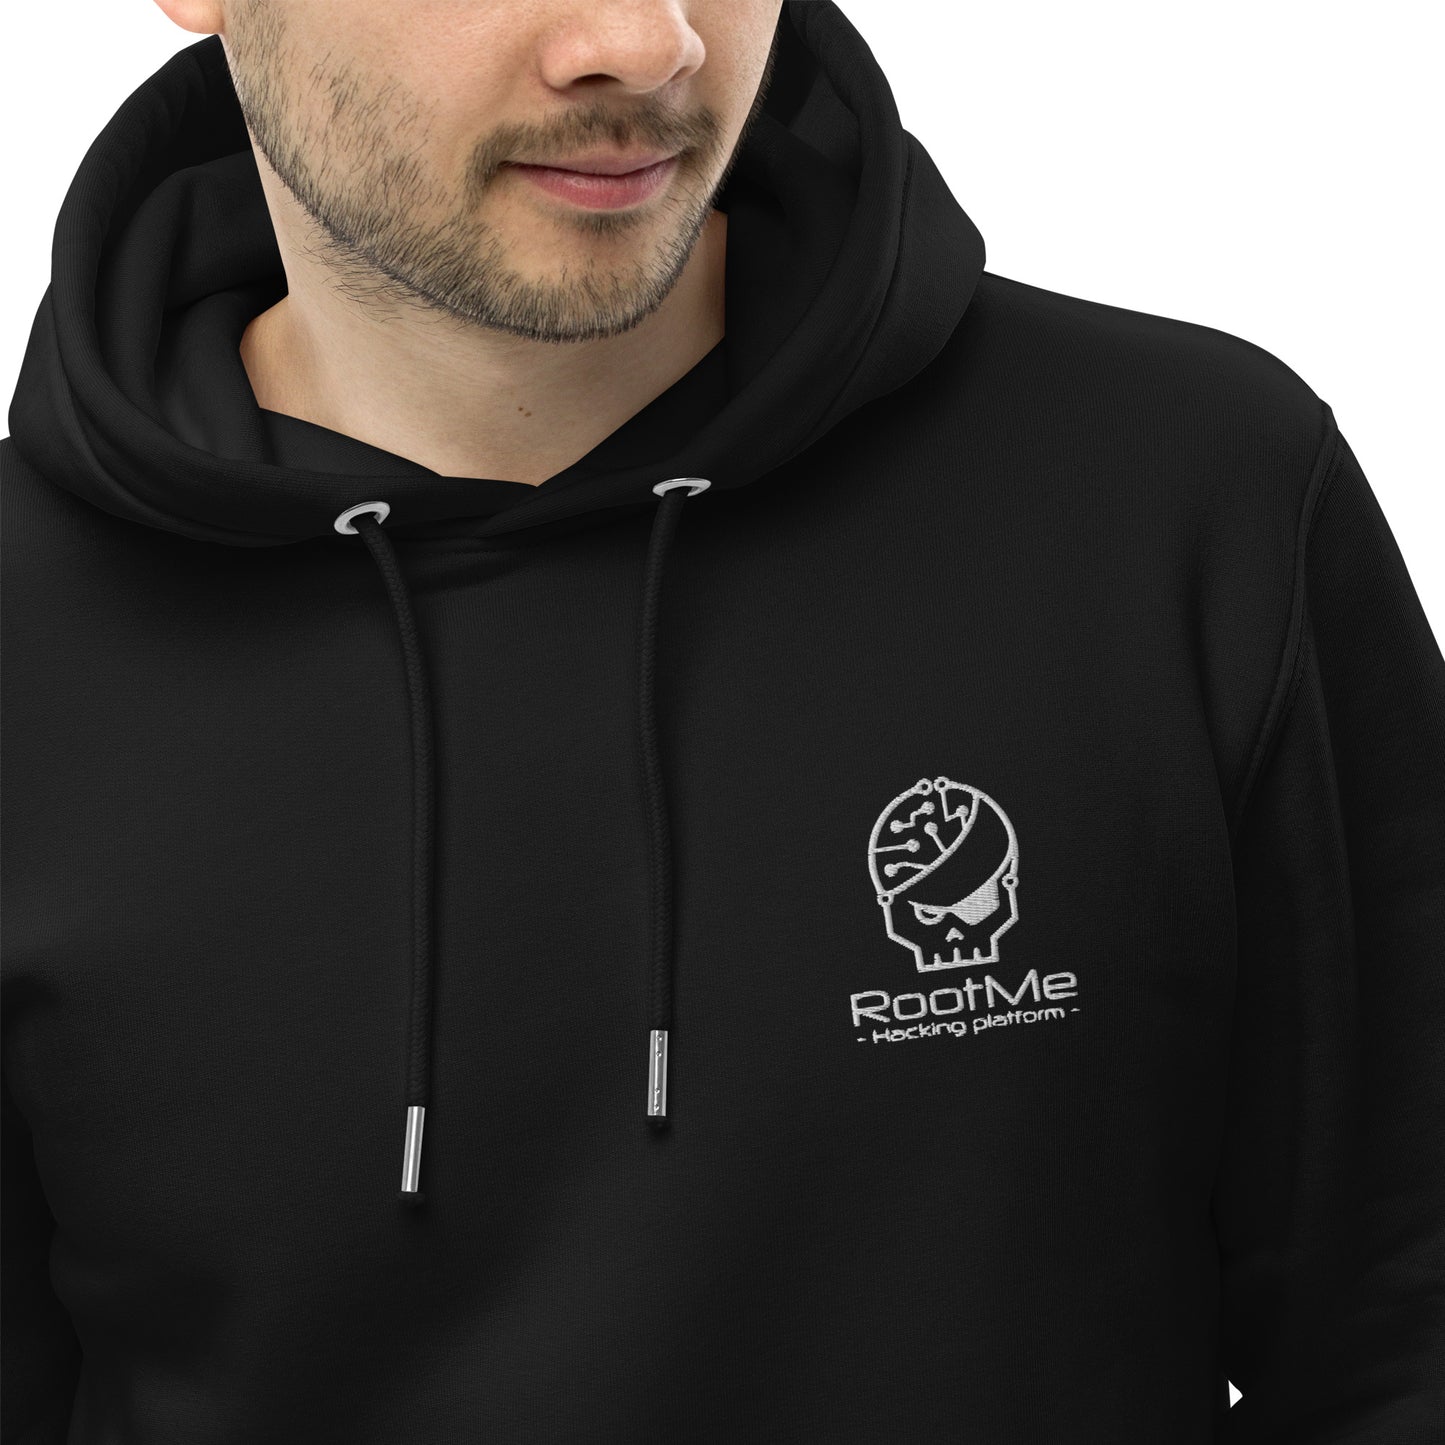 black organic cotton embroidered Hoodie - Style 1